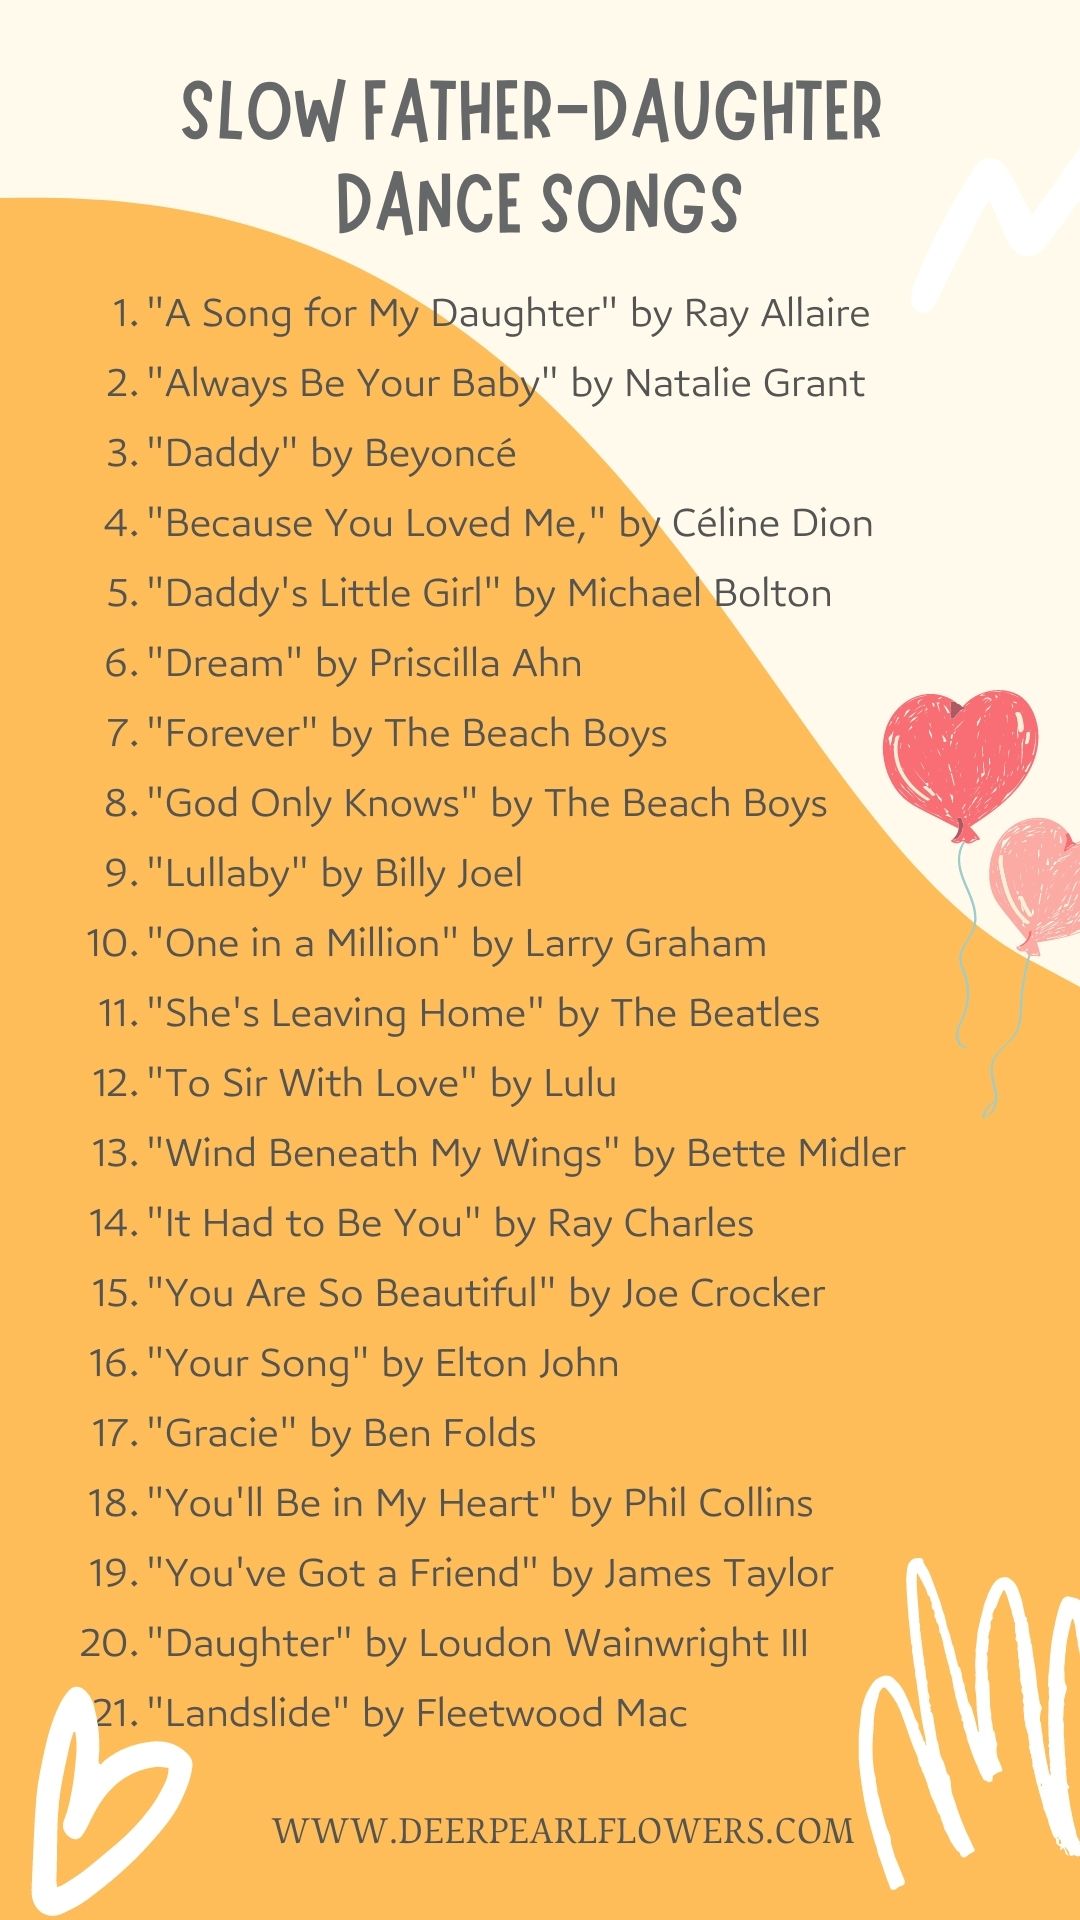 Slow Father-Daughter Dance Songs